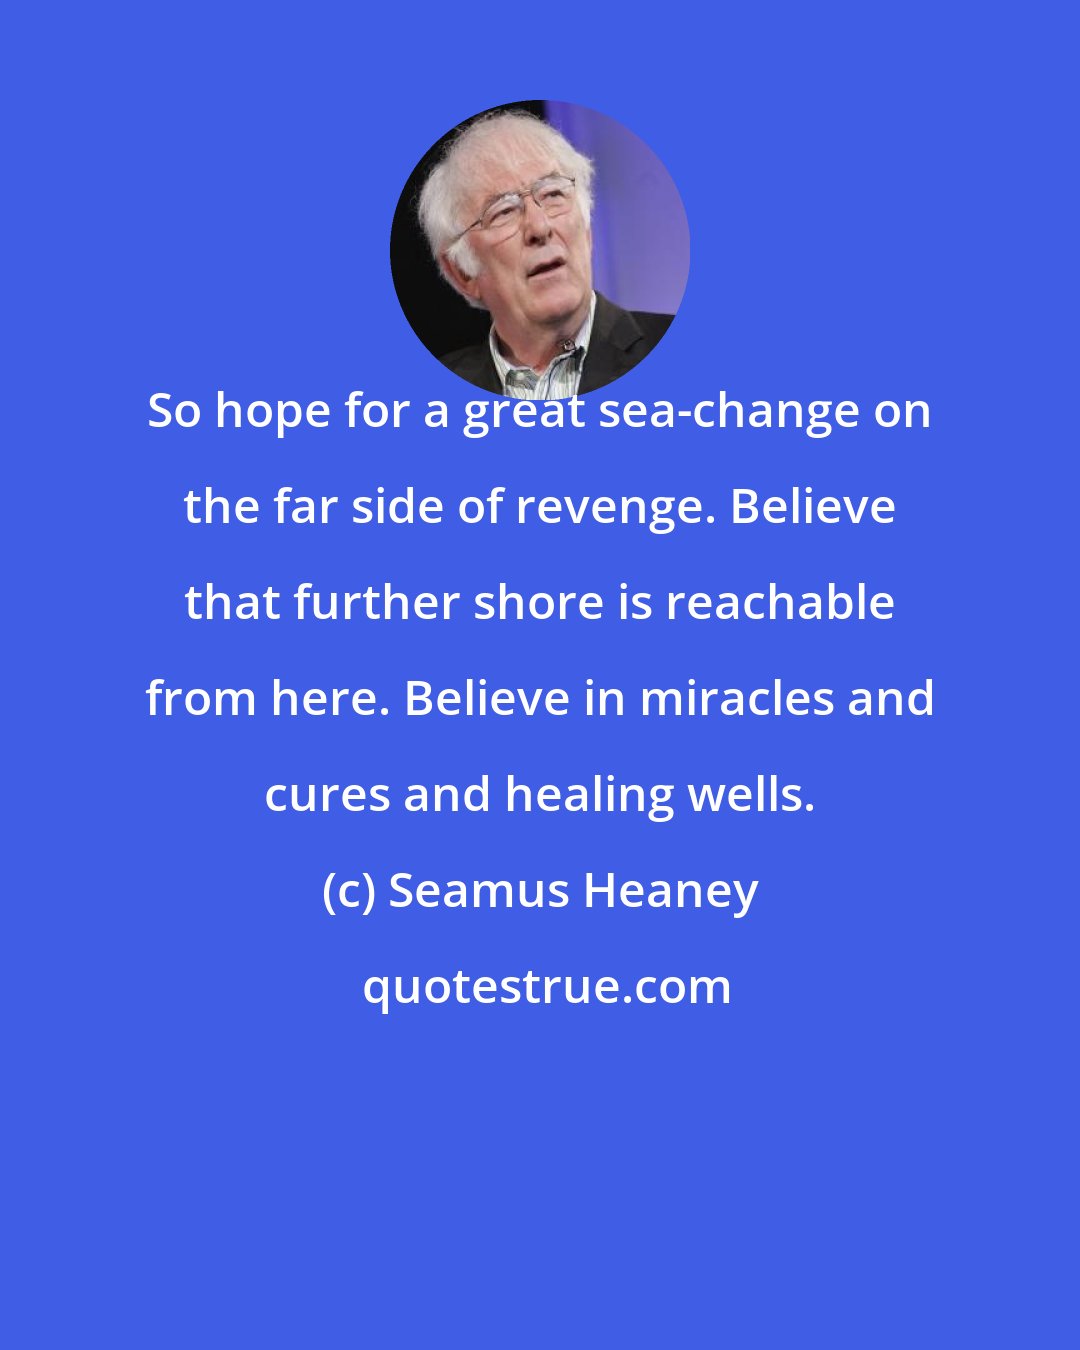 Seamus Heaney: So hope for a great sea-change on the far side of revenge. Believe that further shore is reachable from here. Believe in miracles and cures and healing wells.